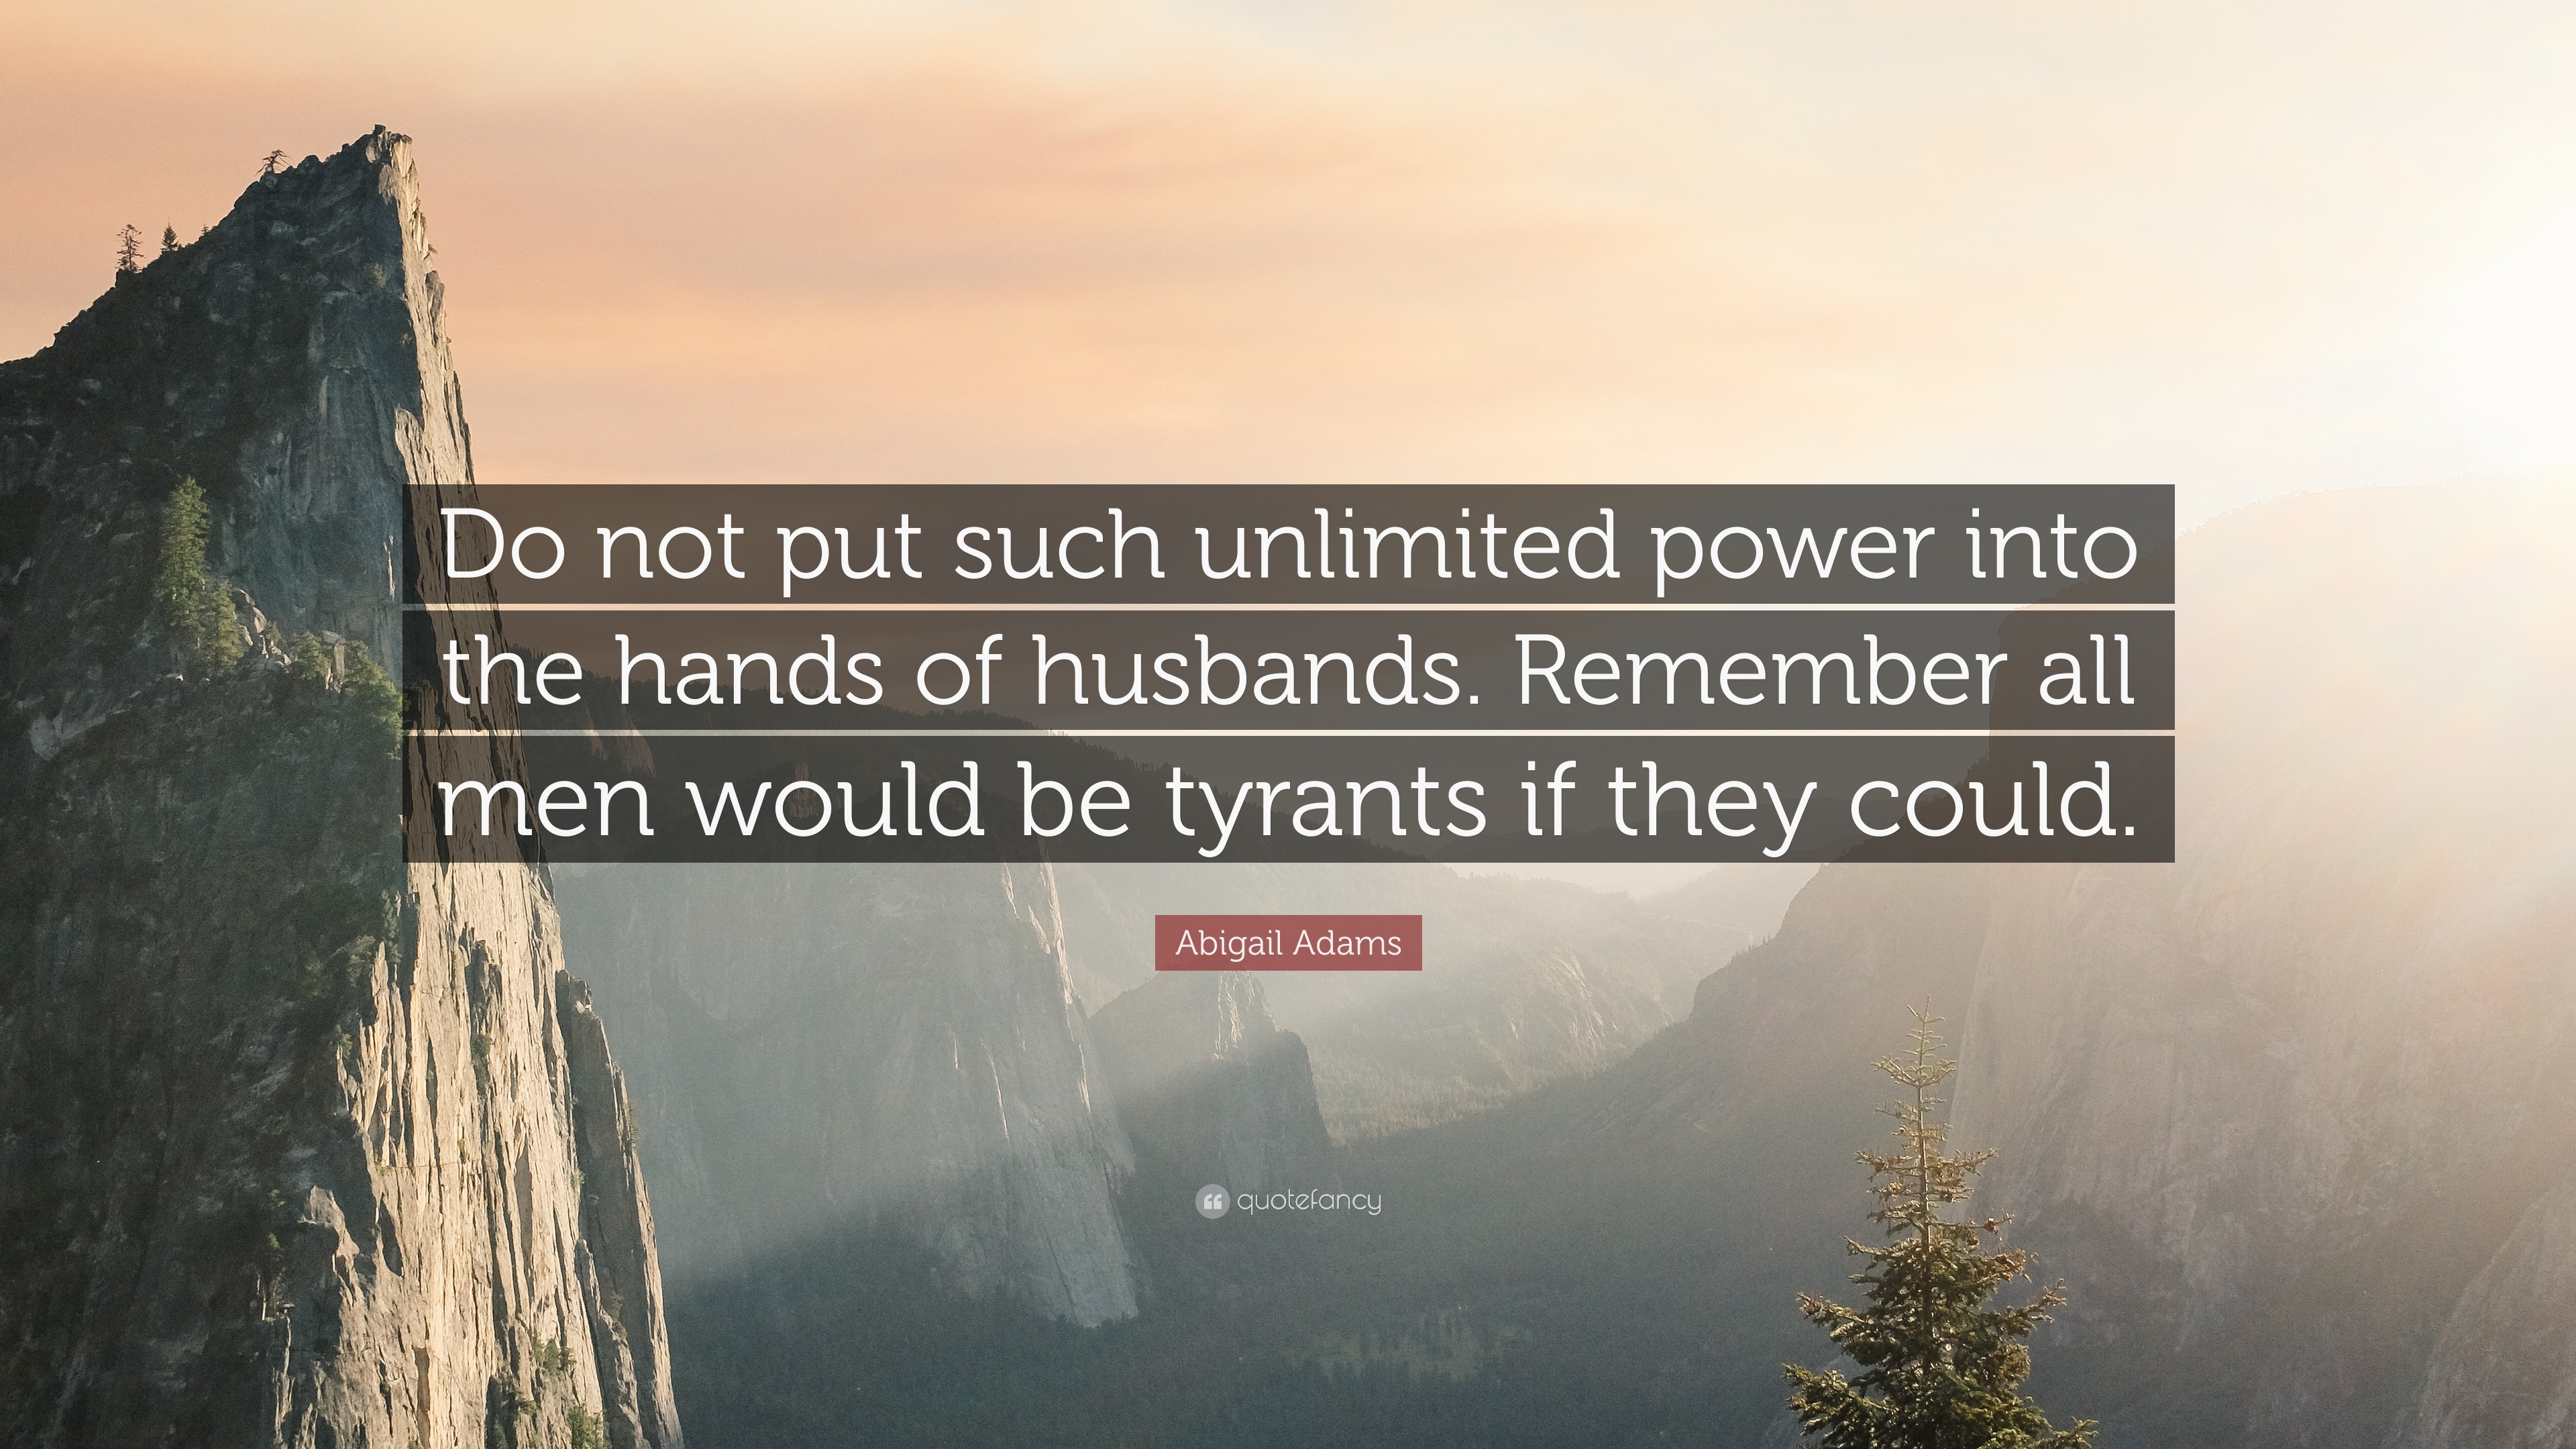 Abigail Adams Quote “Do not put such unlimited power into the hands of